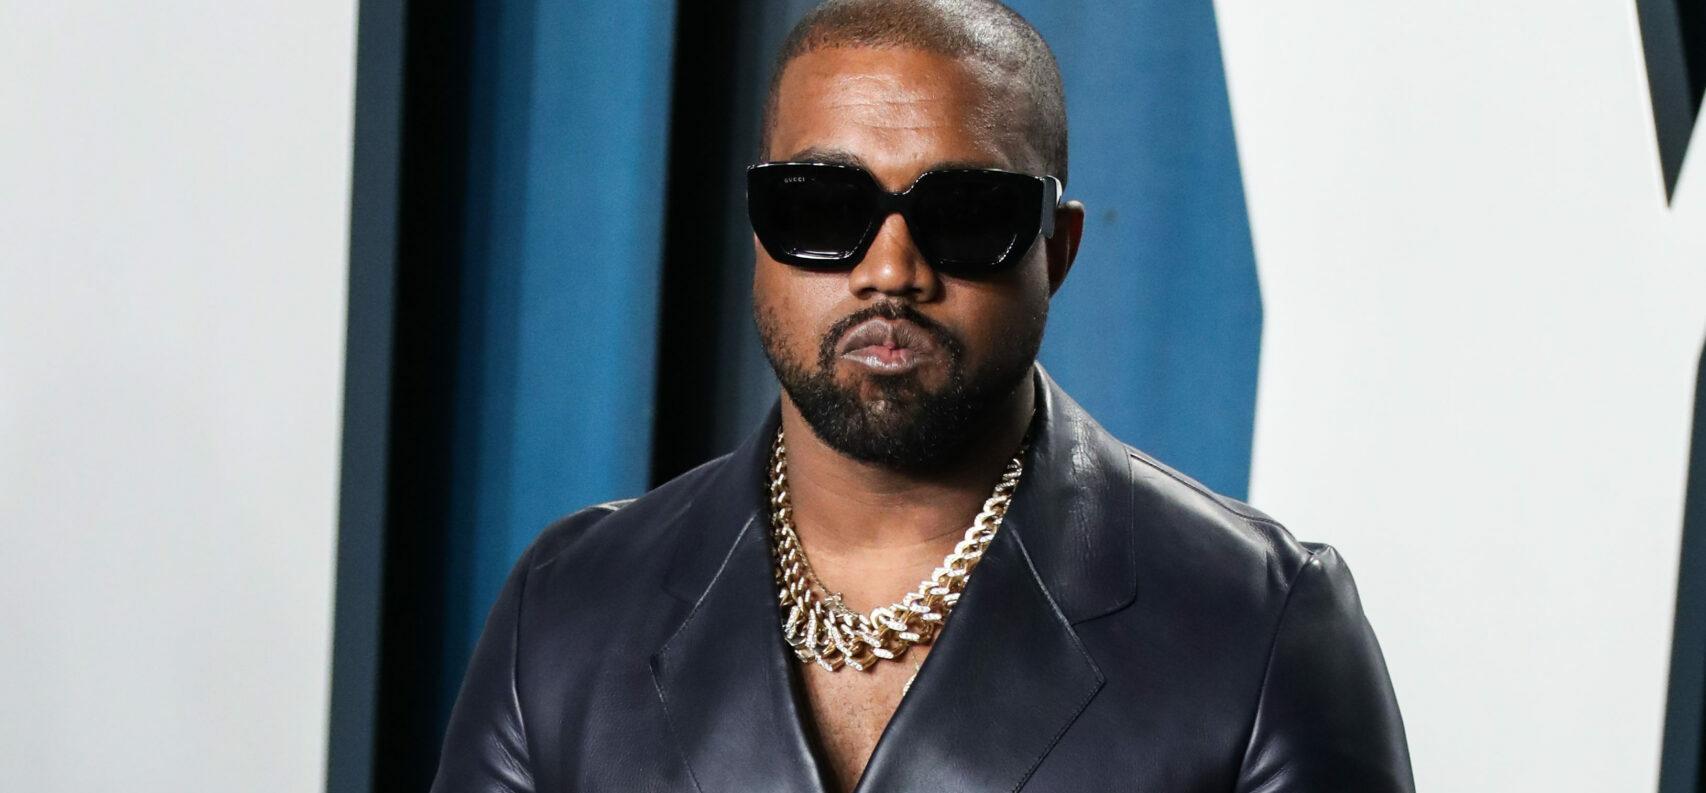 Kanye West’s Company ‘Yeezy’ Ordered To Pay $950,000 Over Major Shipping Issues